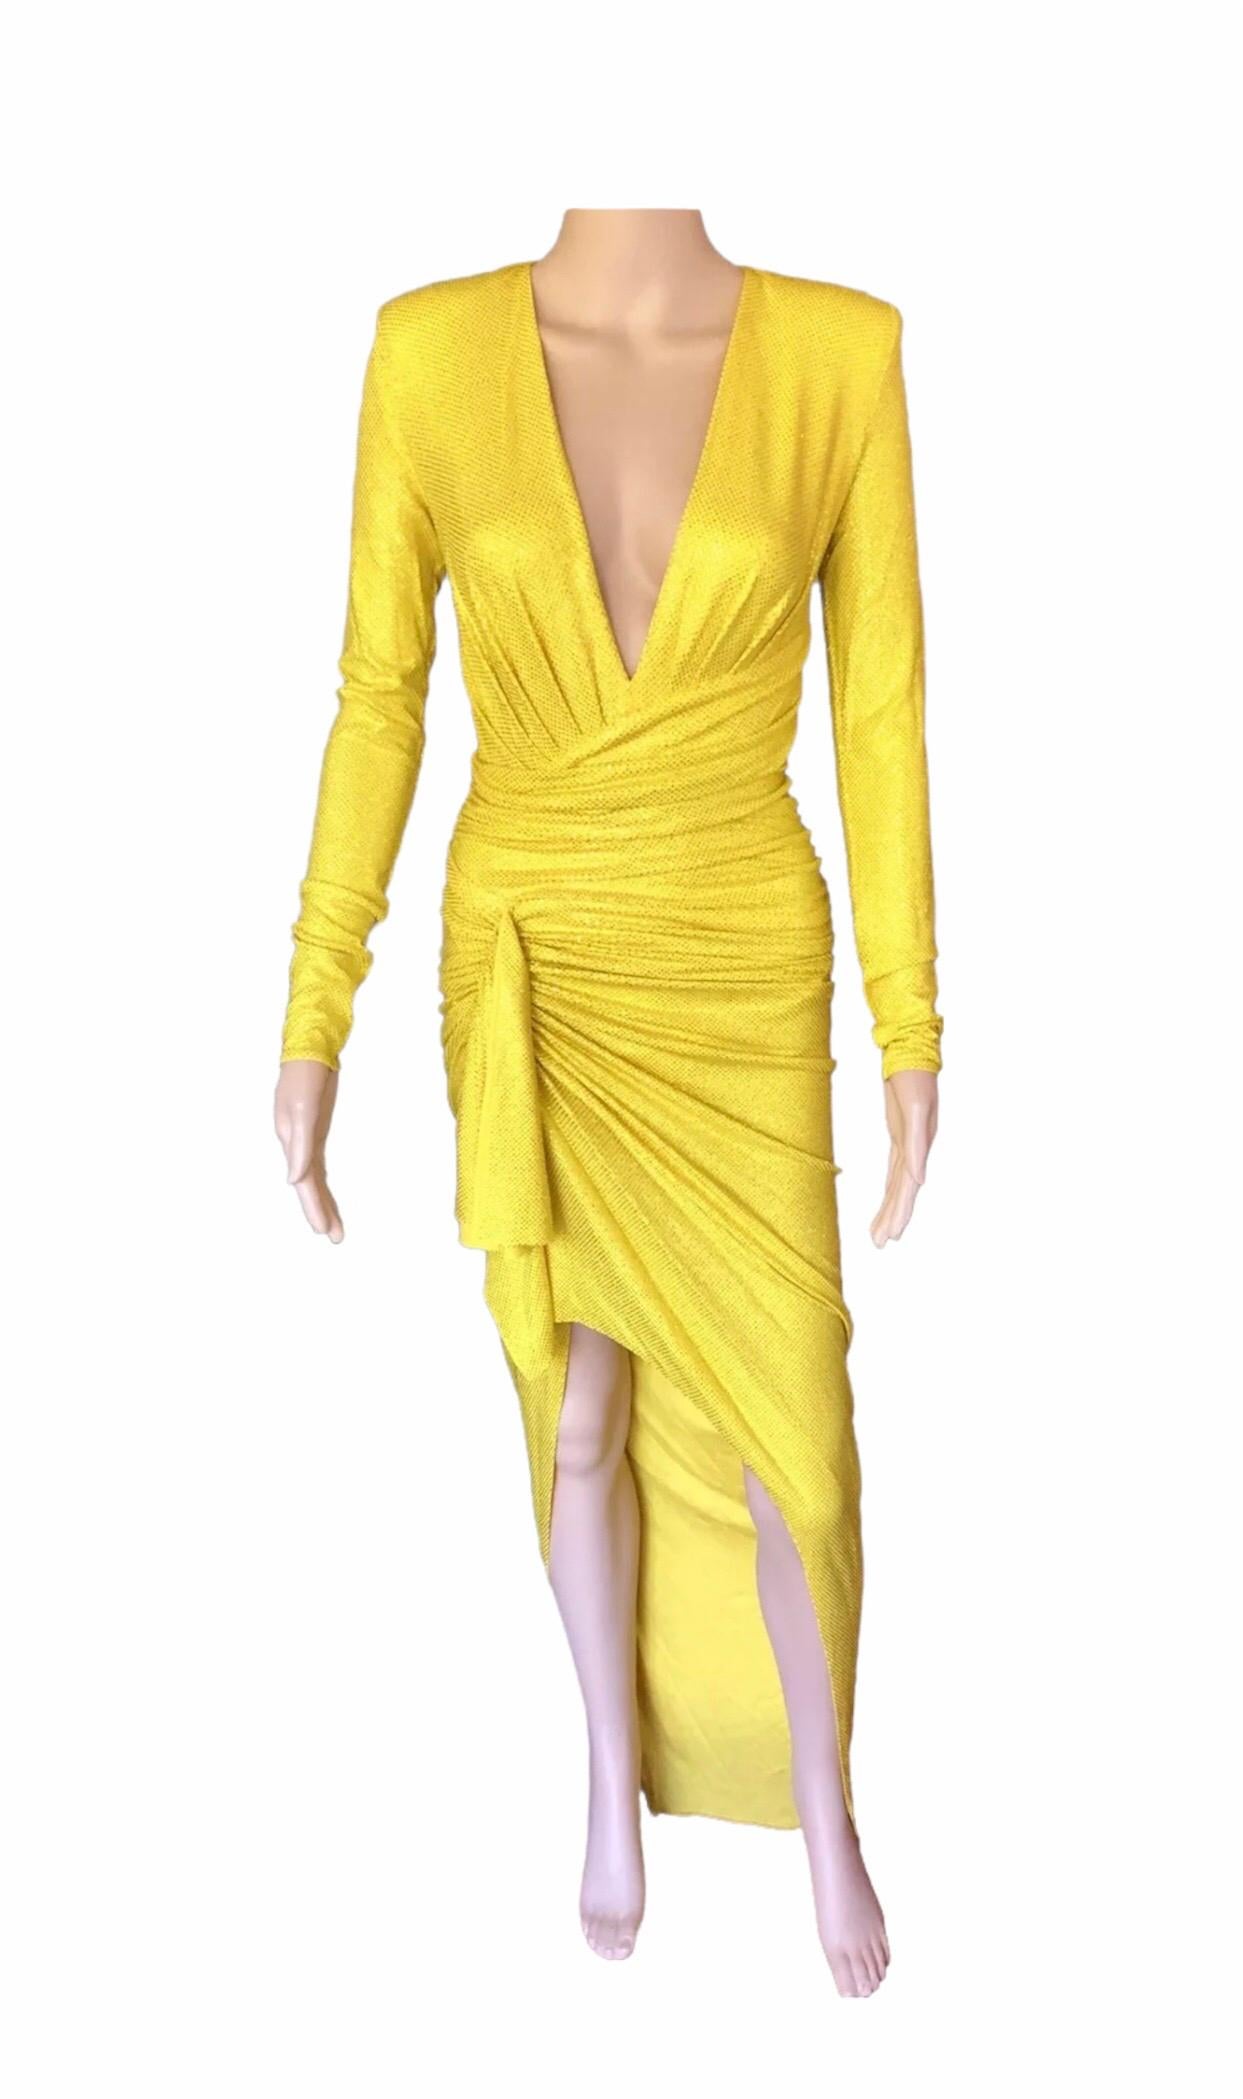 Alexandre Vauthier Crystal Embellished Plunging Neckline Yellow Evening Dress Gown FR 36

• Made in Italy

• Dry clean only

• Crossover neckline

• Microcrystal embellished accents throughout

• Ruched side detail with draped fabric accent

